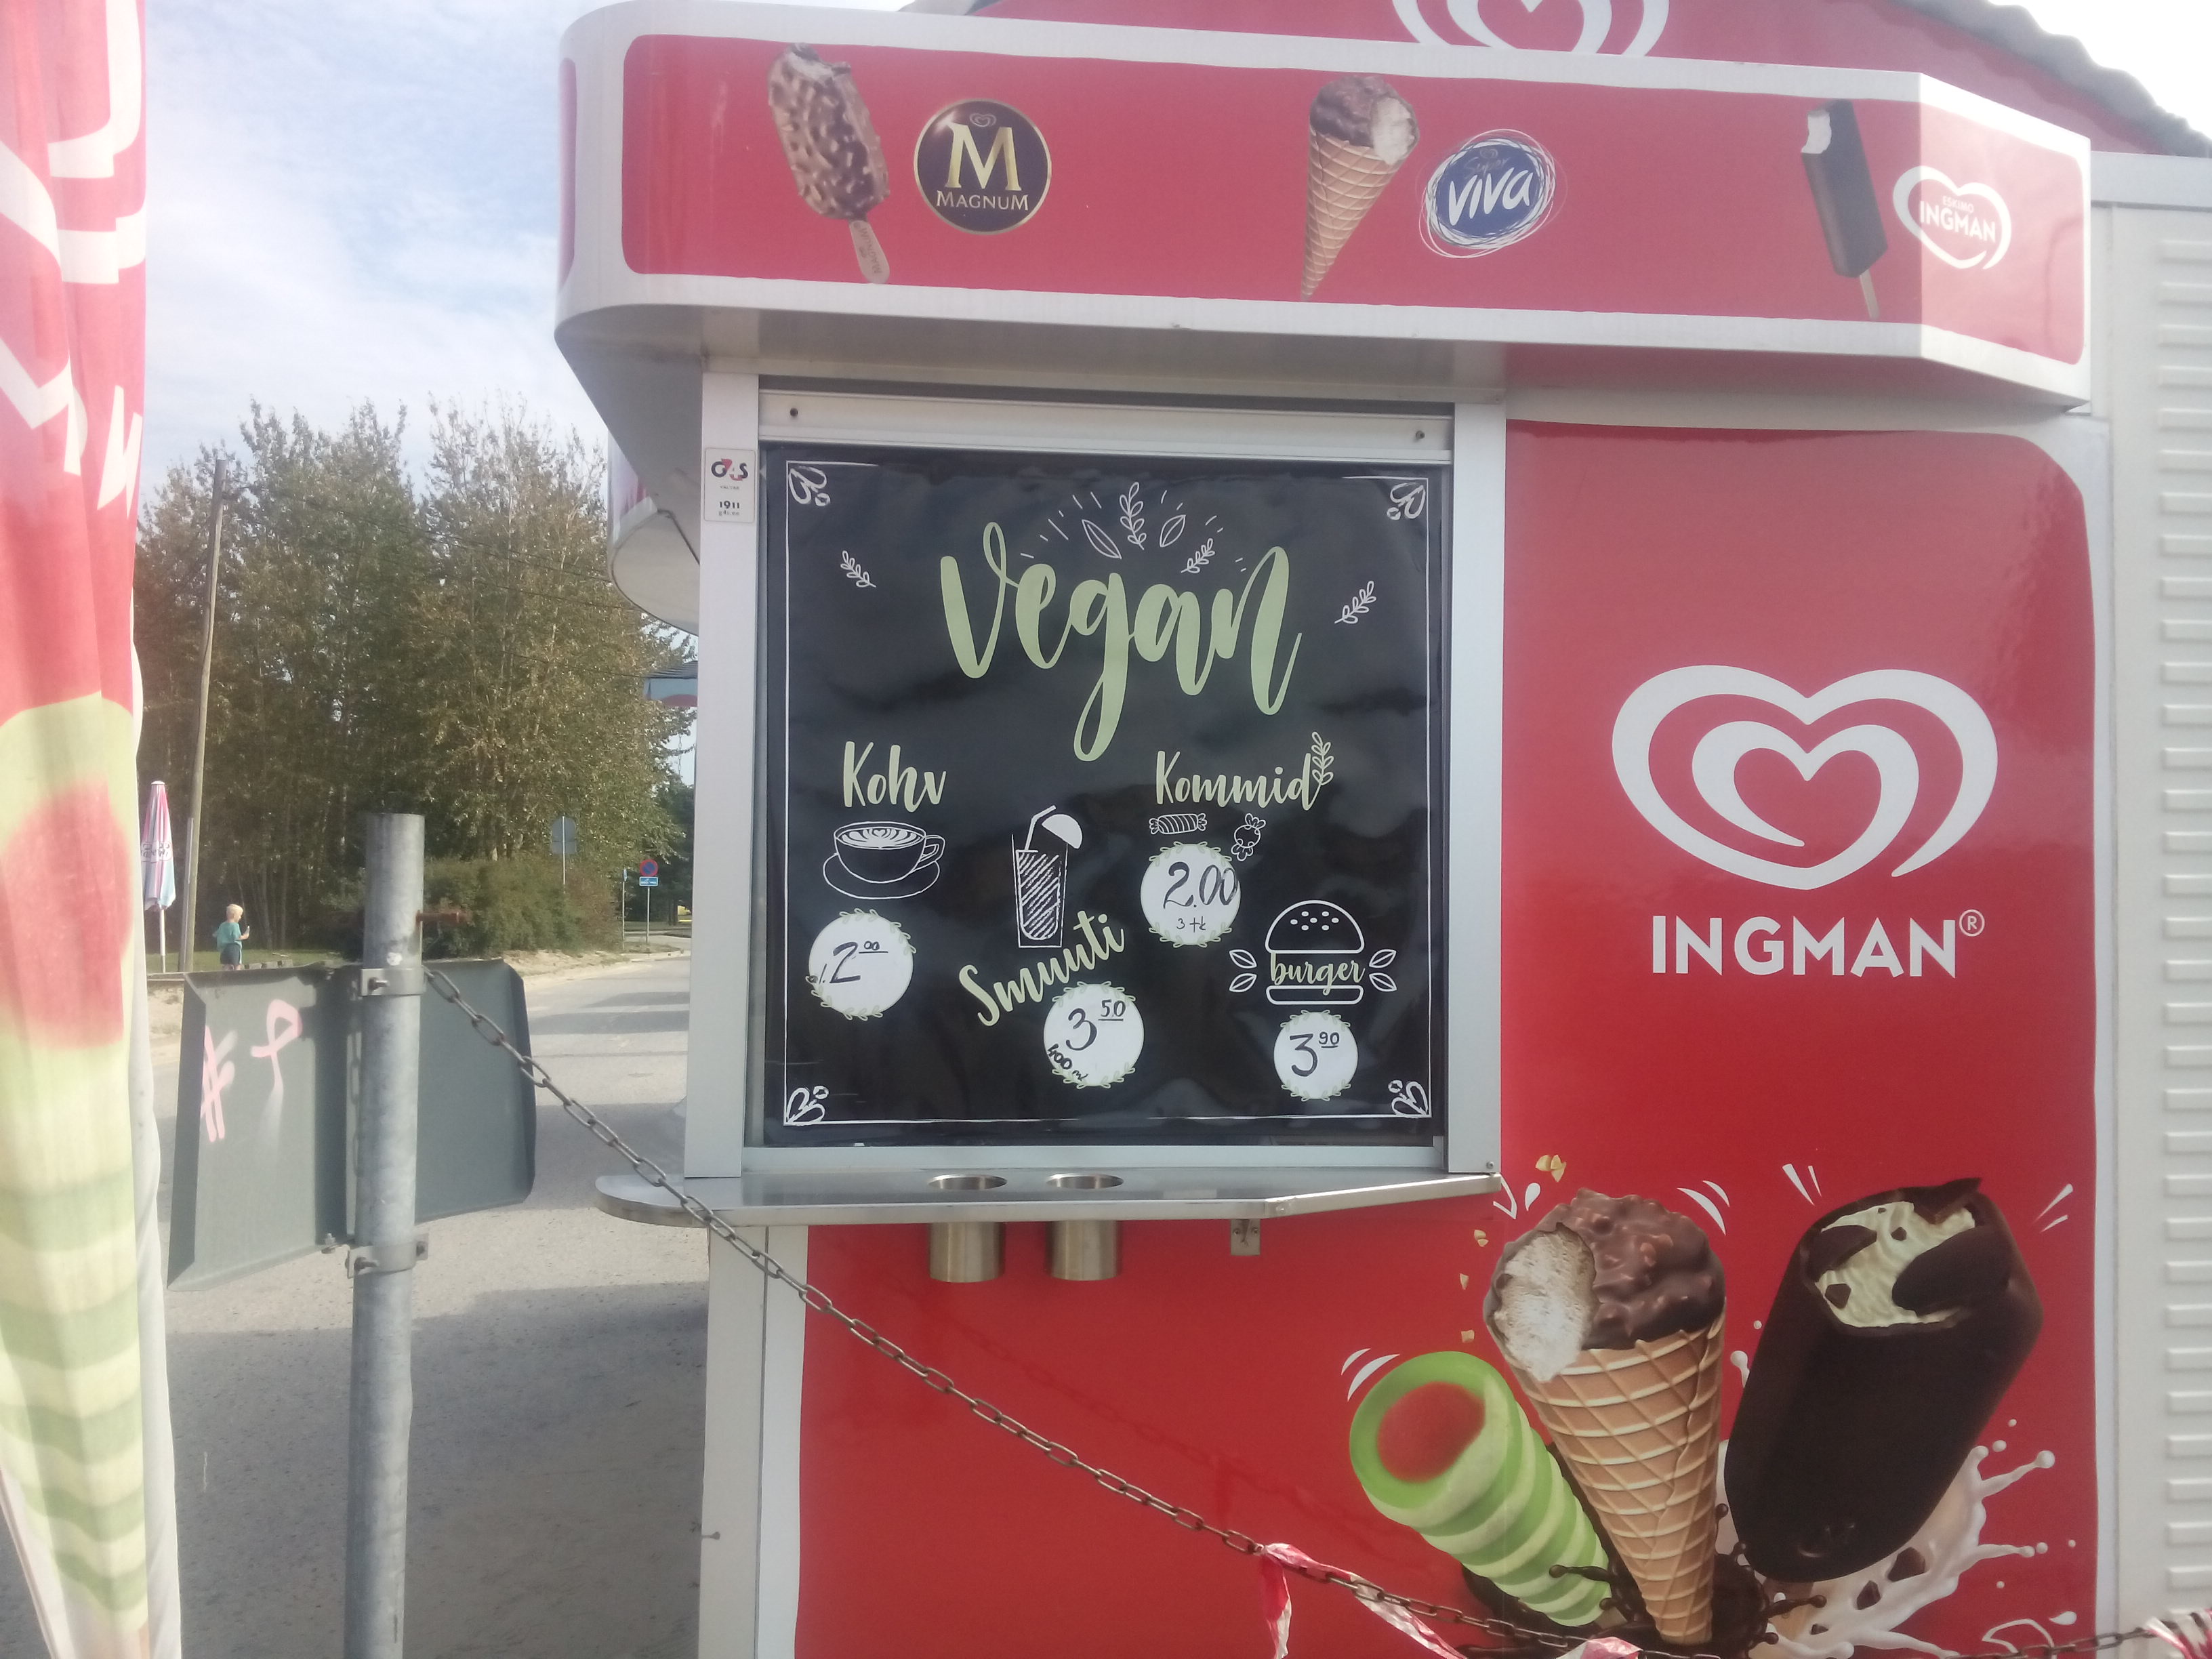 A side view of a food kiosk with the red and white Wall's logo, pictures of ice creams, and a separate vegan menu